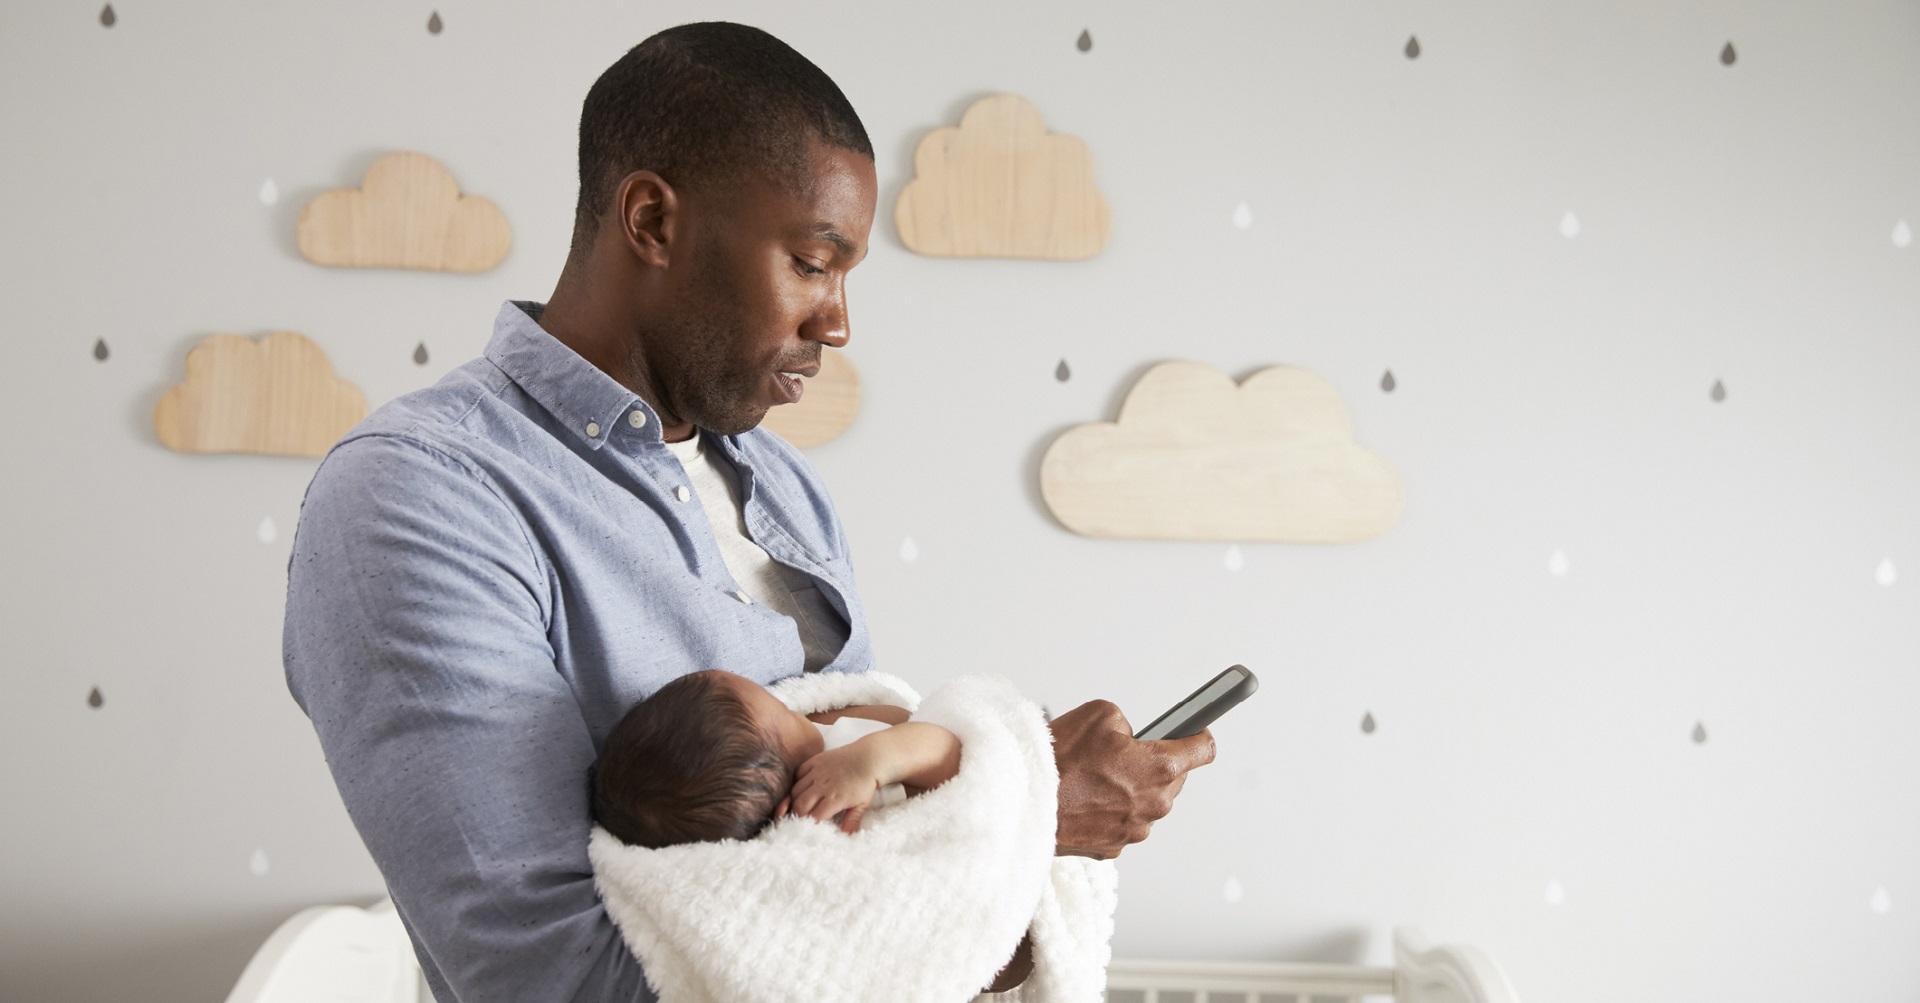 father holding baby in nursery on cell phone